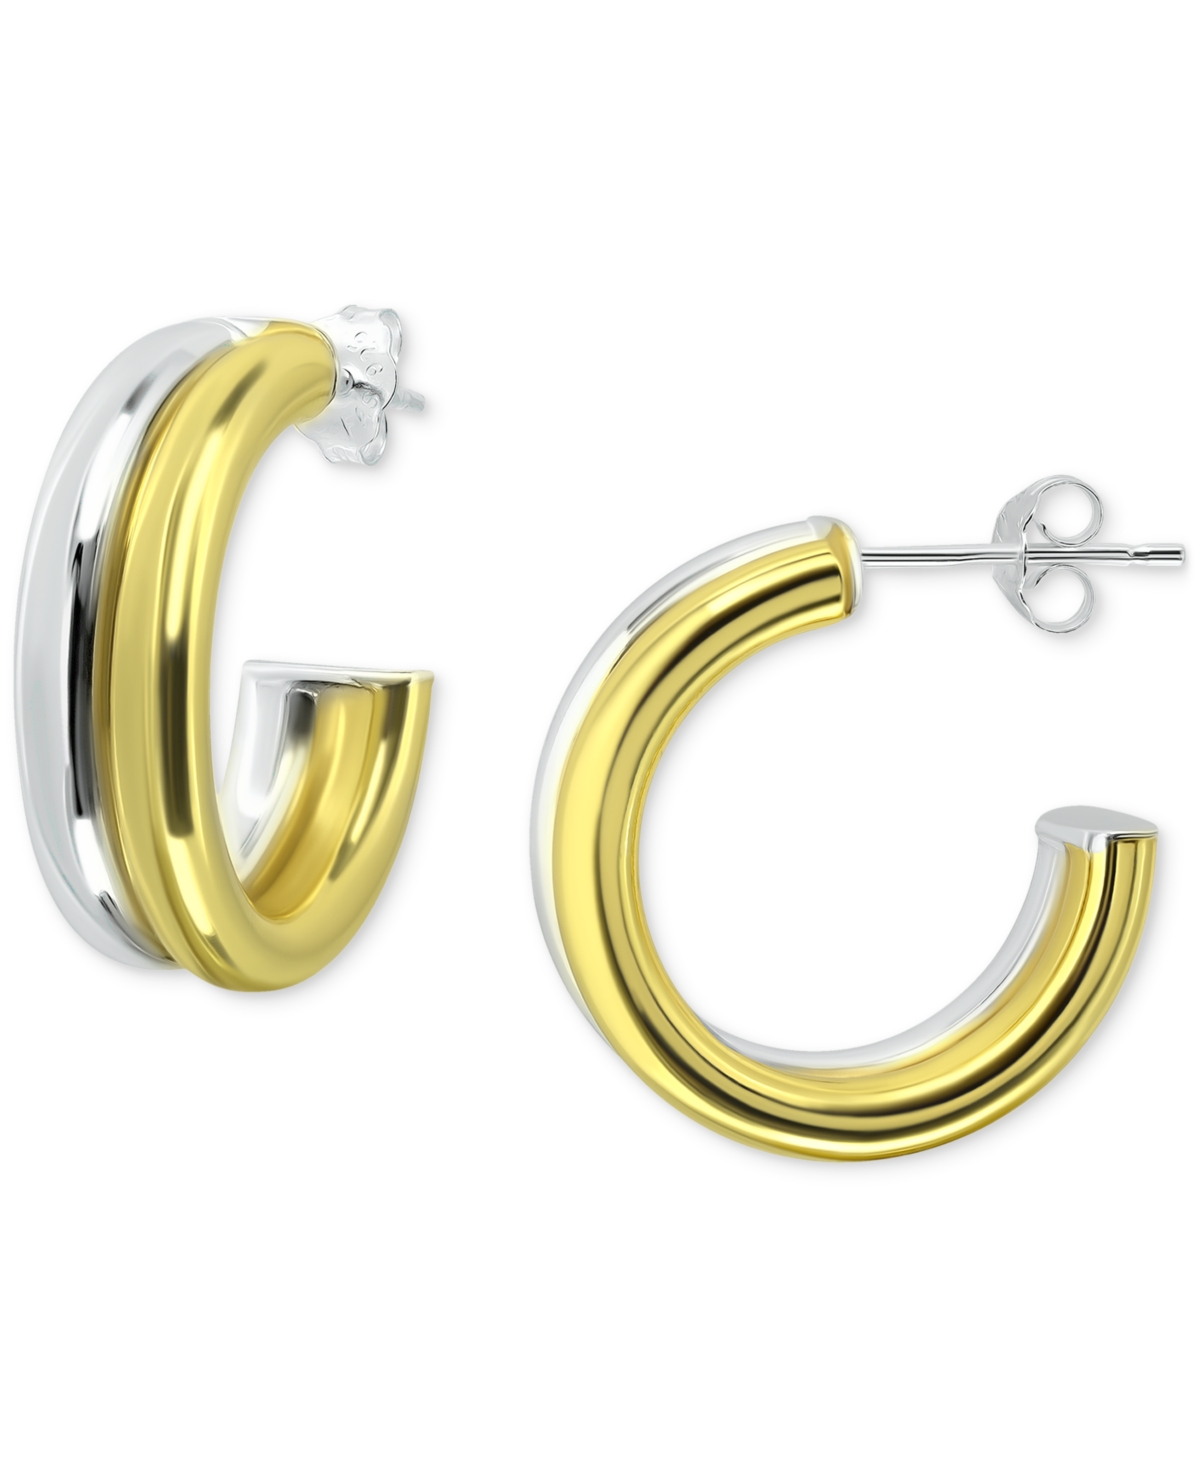 Giani Bernini Polished Double Small Hoop Earrings In Sterling Silver & 18k Gold-plate, 3/4", Created For Macy's In Two-tone